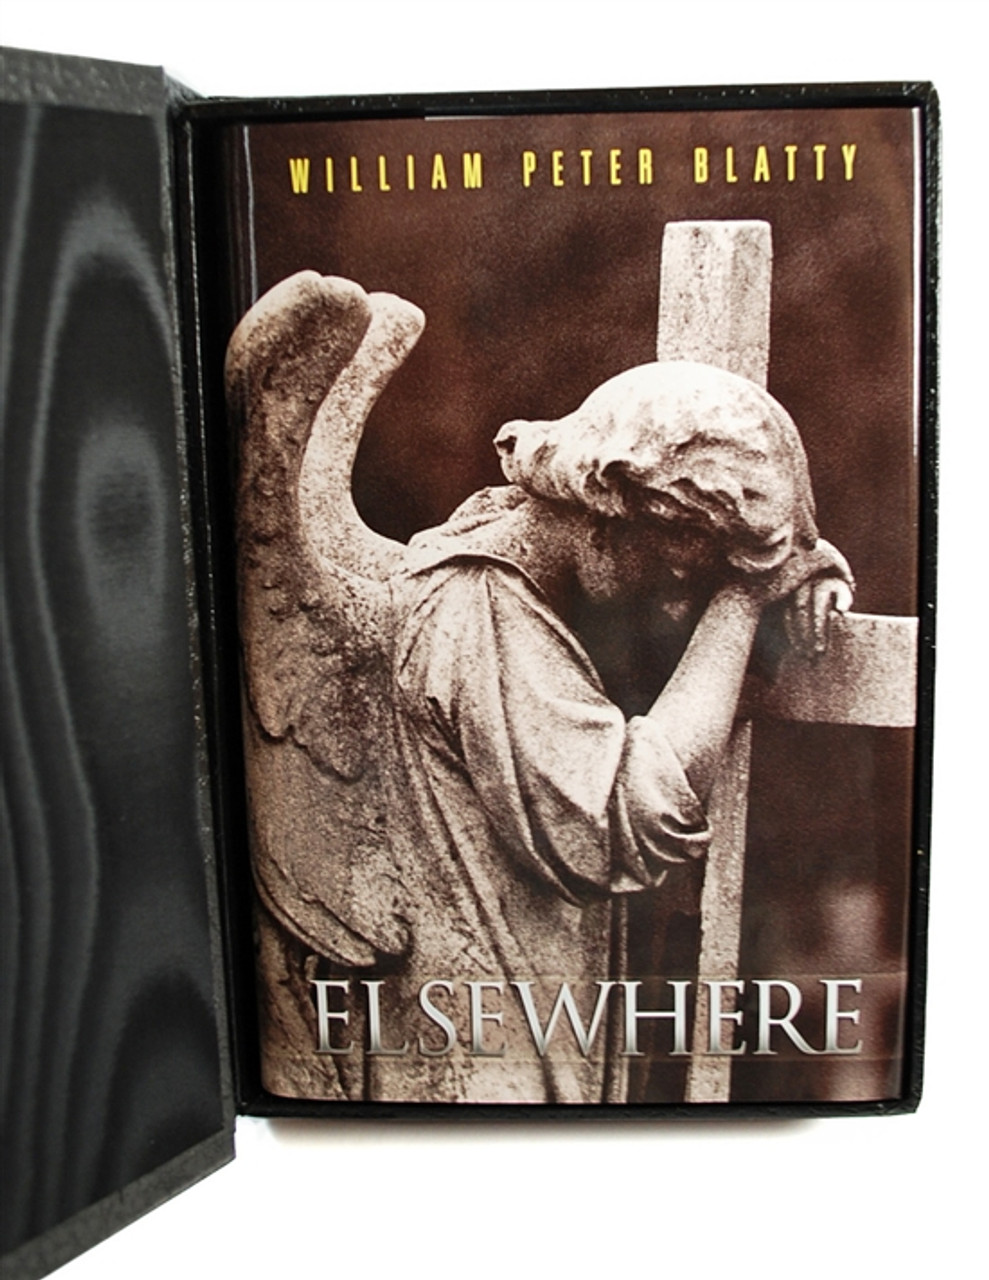 William Peter Blatty "Elsewhere" Signed Limited LETTERED Edition "M" of only 52